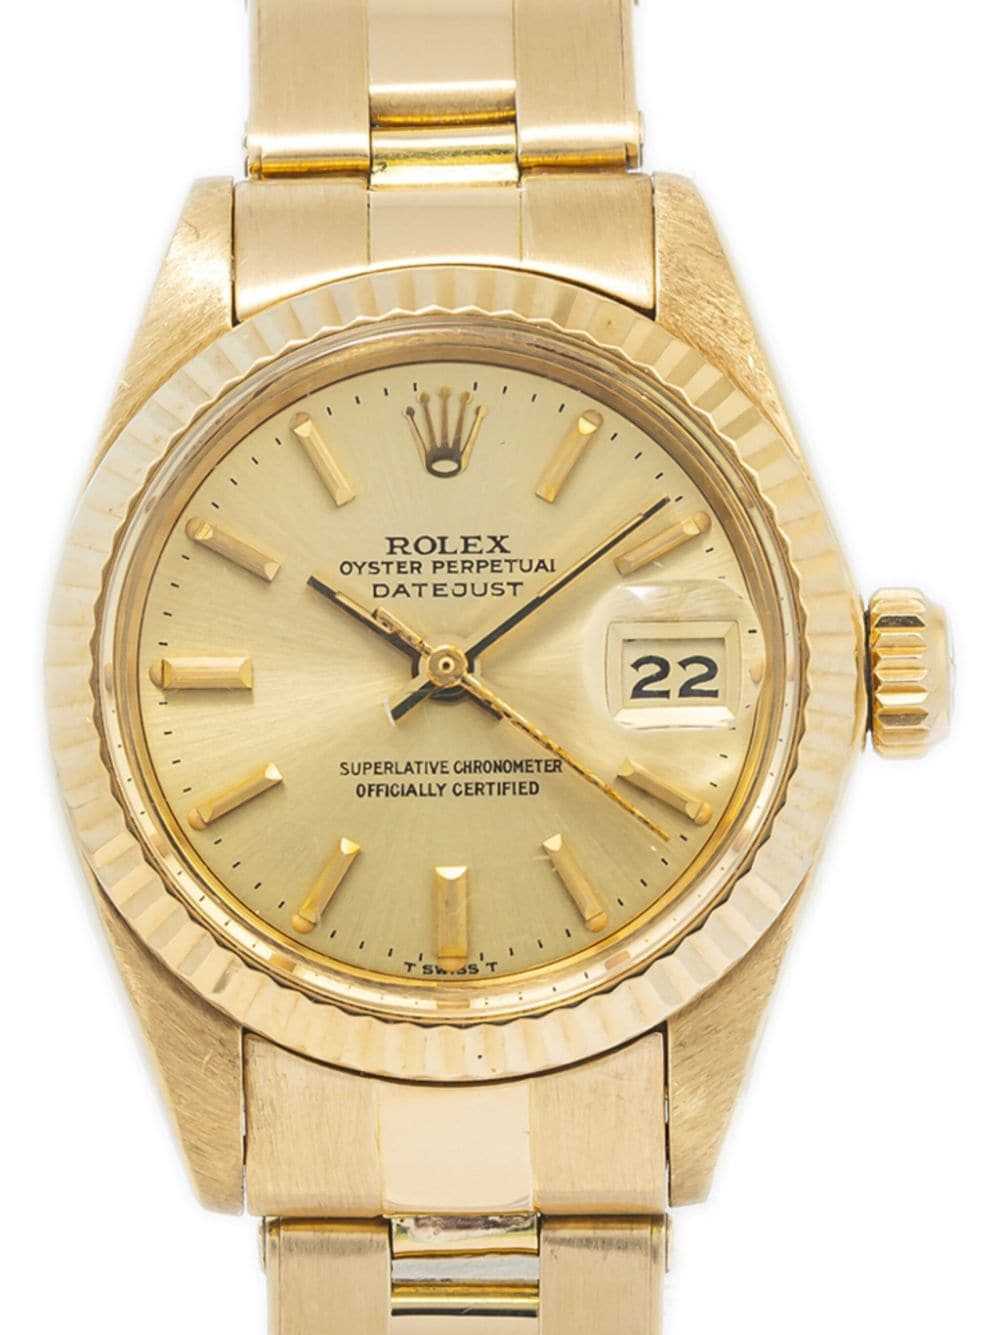 Rolex pre-owned Datejust 26mm - Gold - image 2